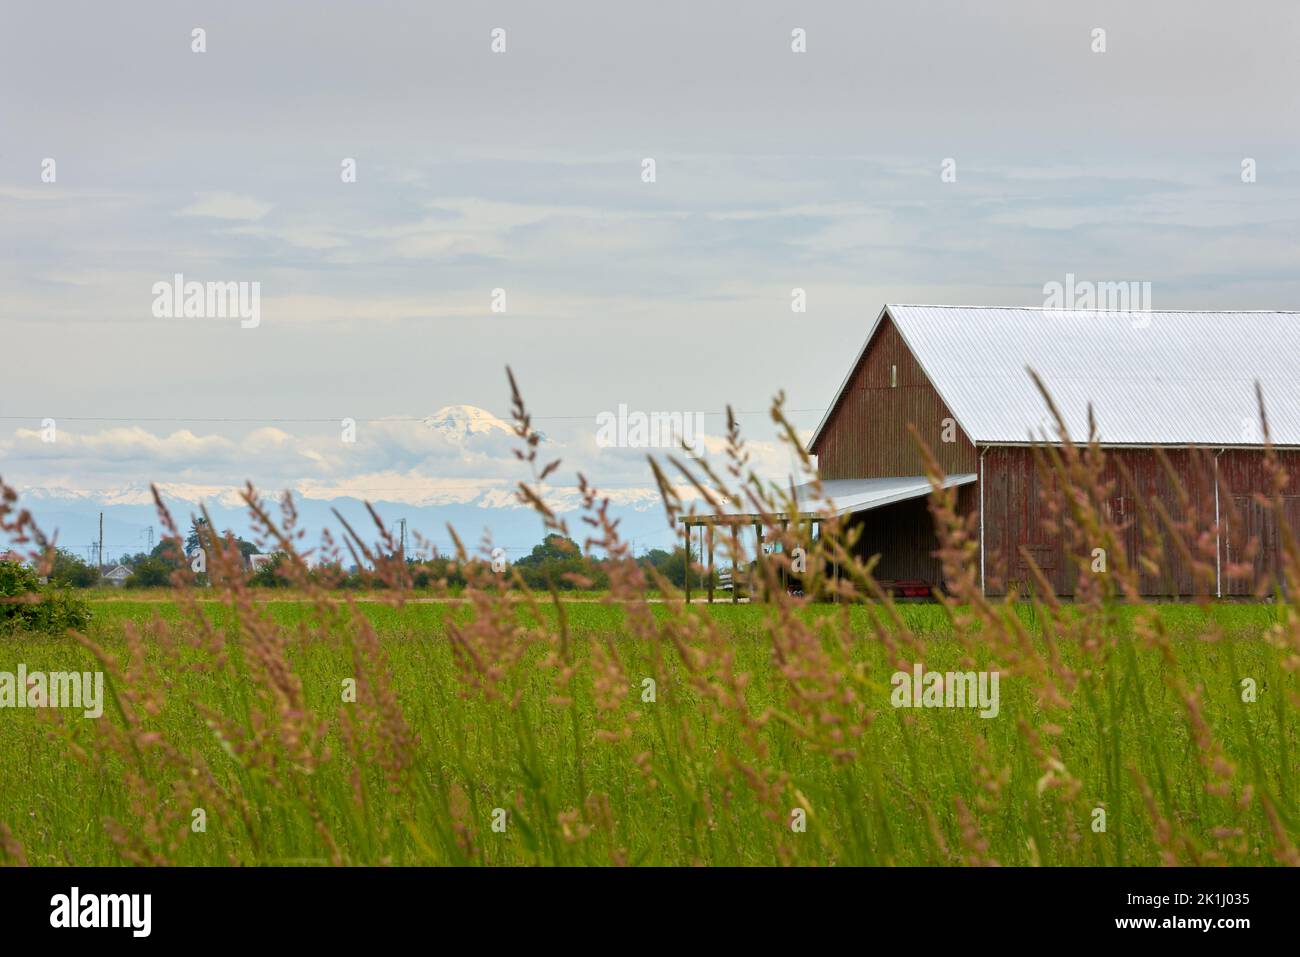 Mount Baker View in Delta BC. Mt. Baker rising in the background of a wheat field and barn in Delta, BC. Stock Photo